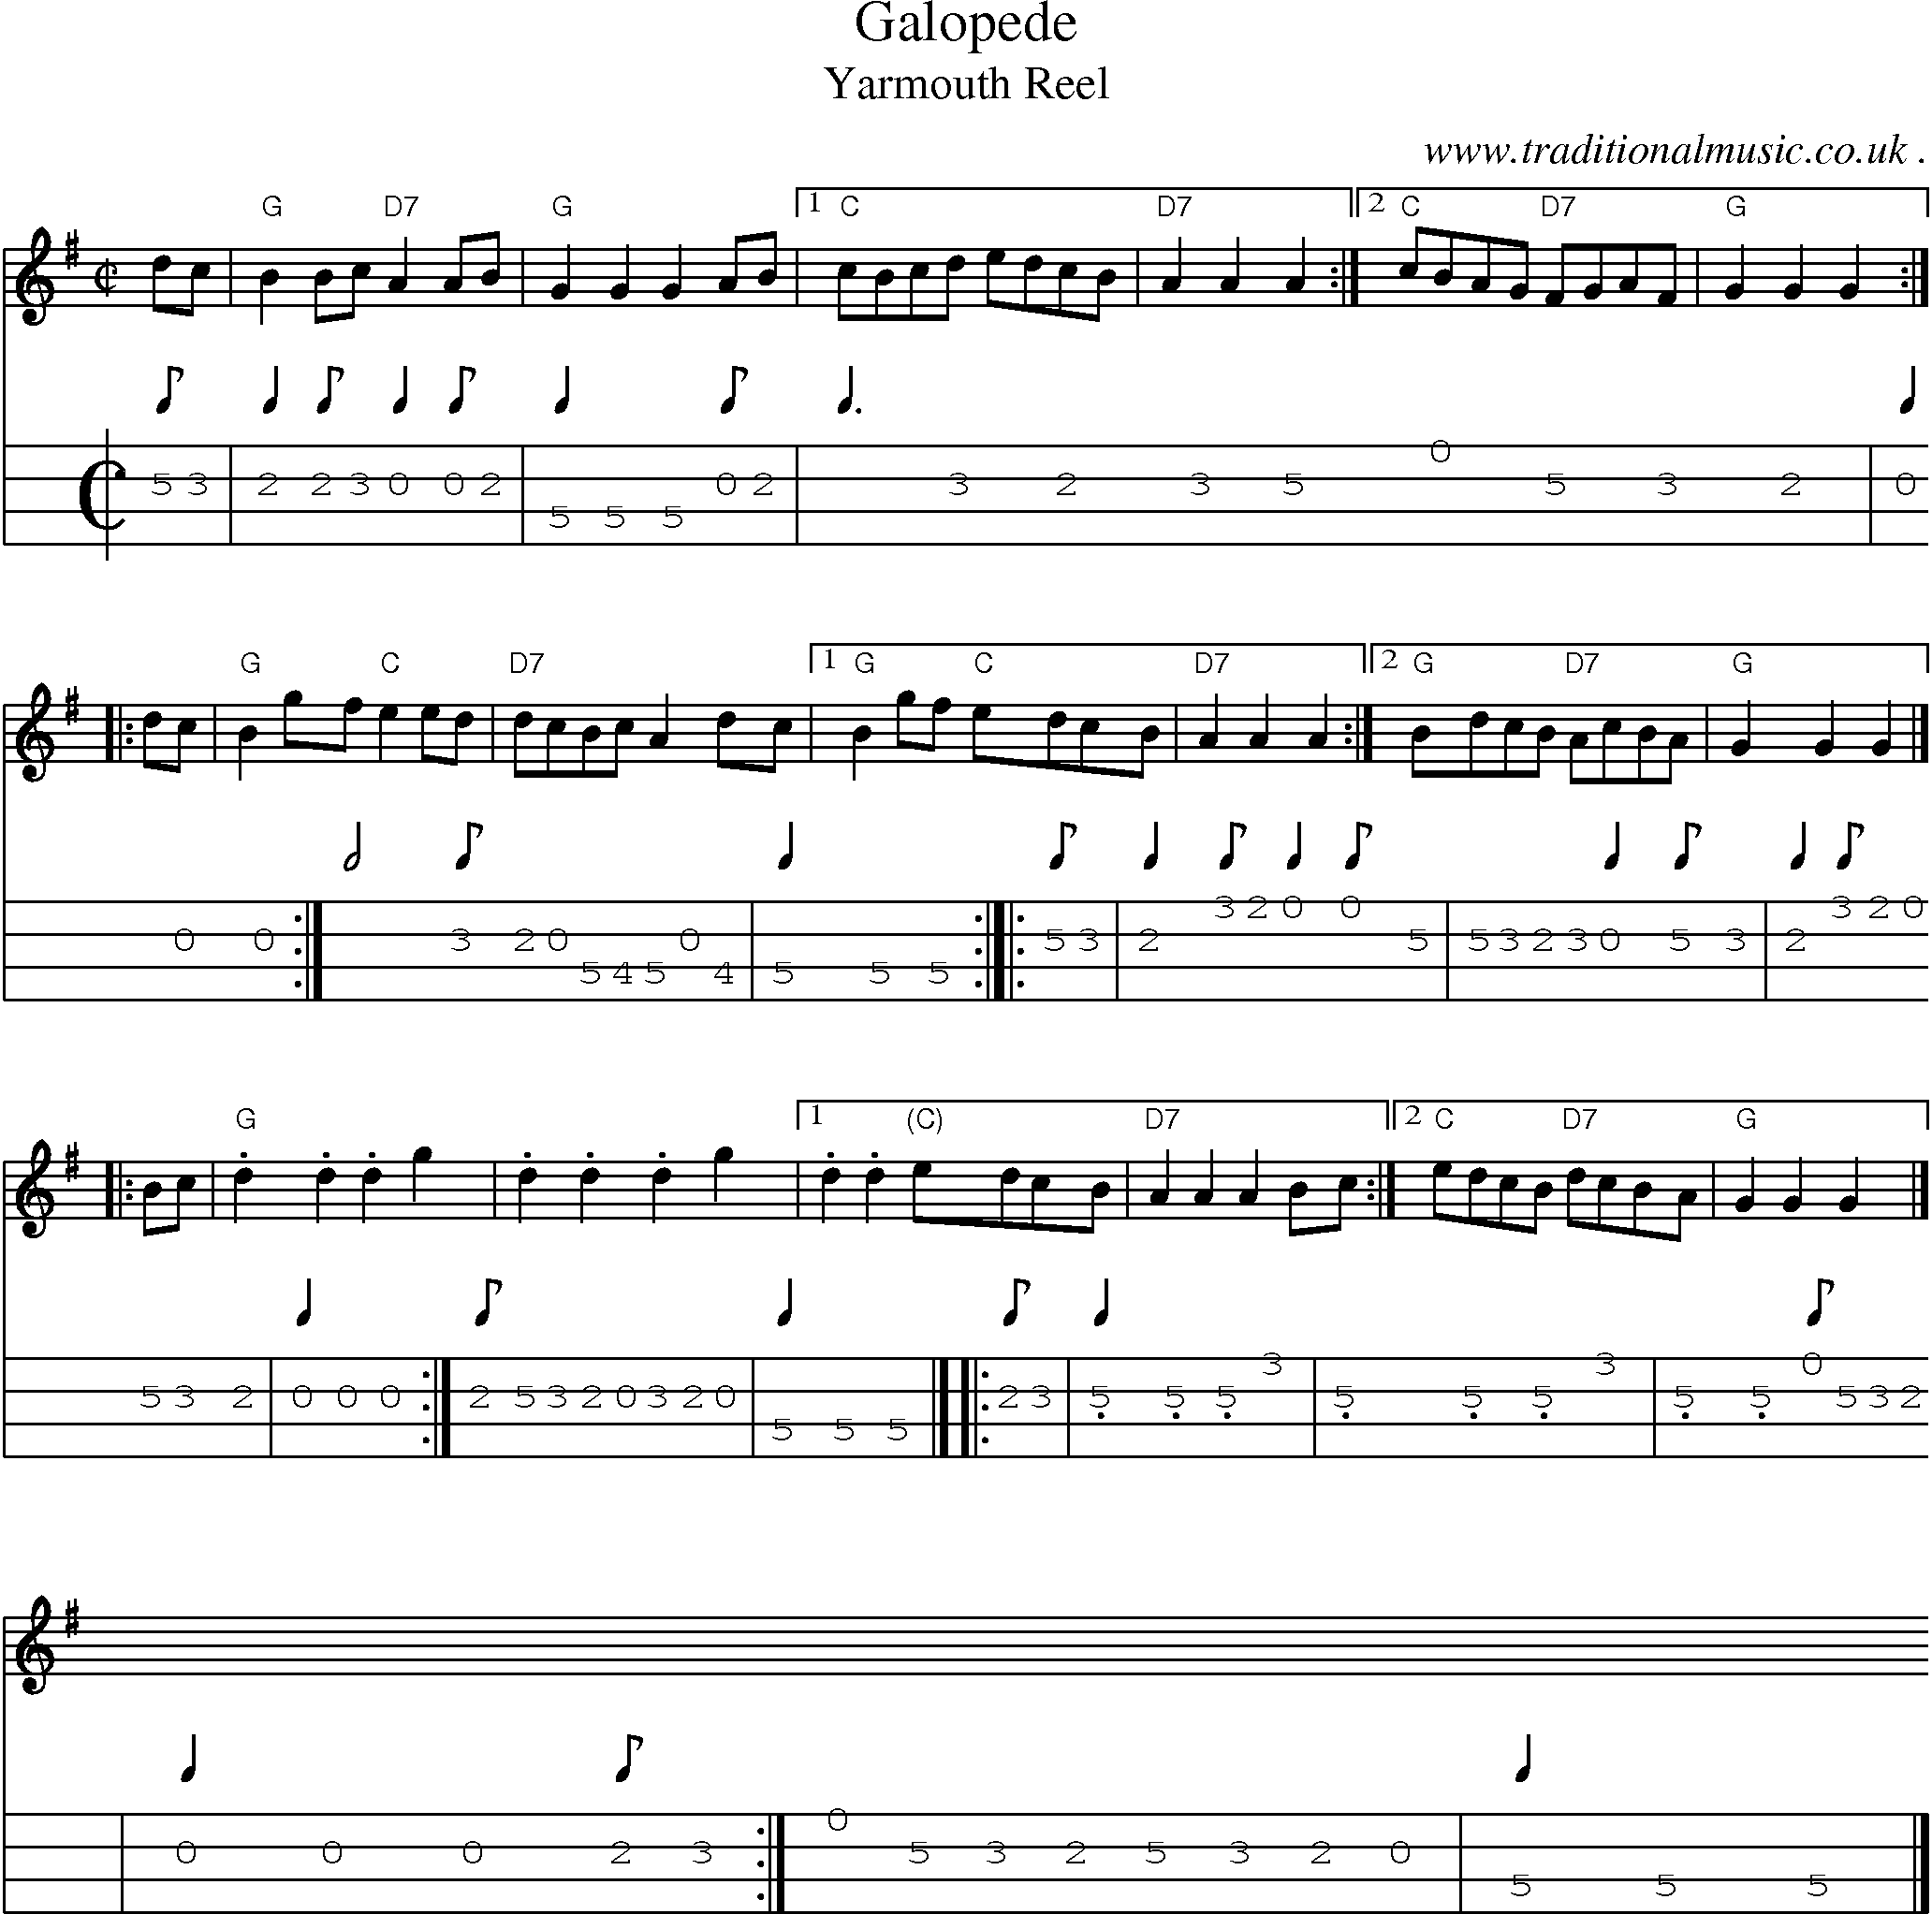 Sheet-music  score, Chords and Mandolin Tabs for Galopede